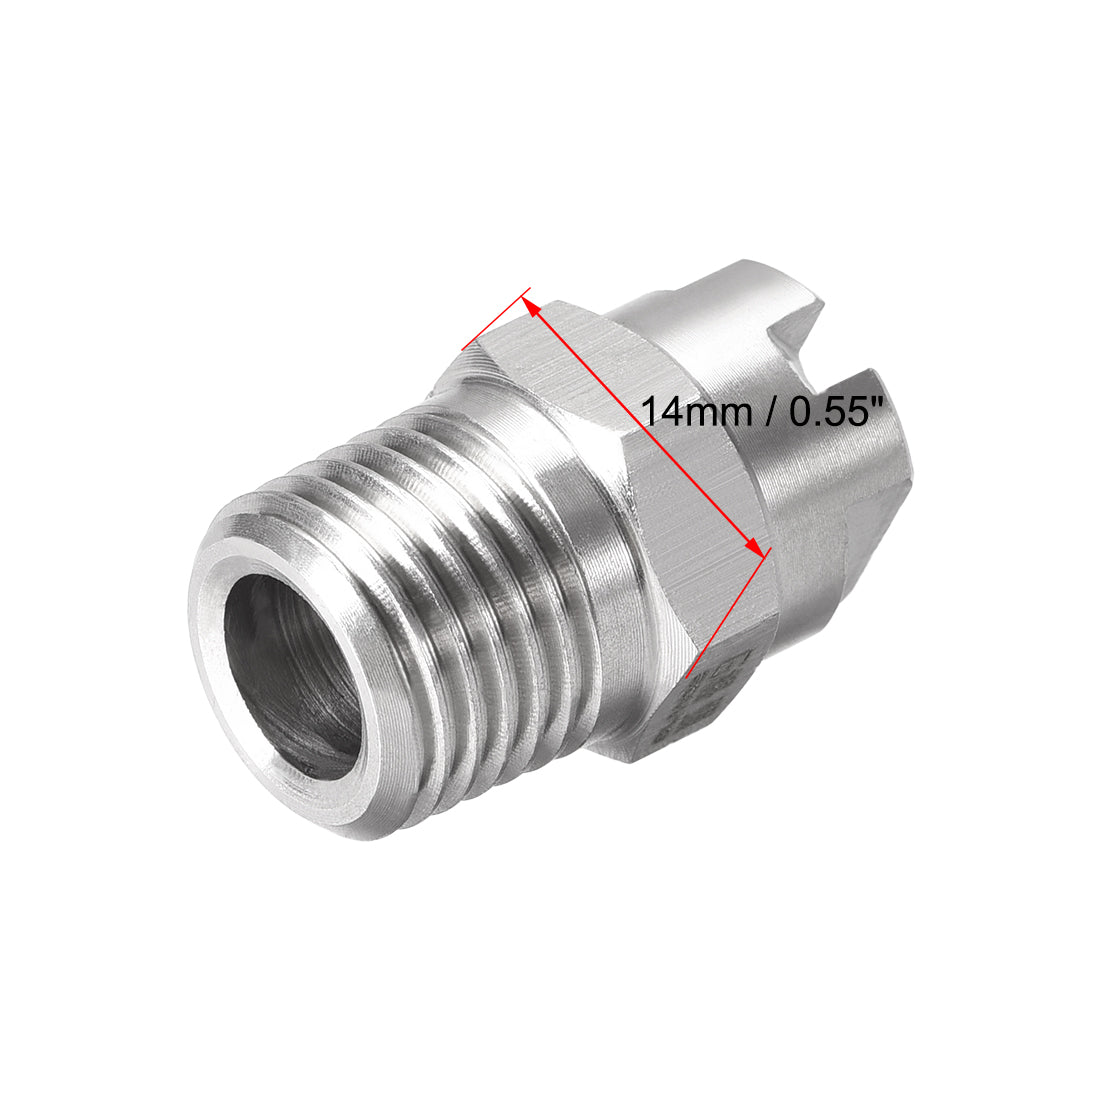 Uxcell Uxcell Flat Fan Spray Tip - 1/4BSPT Male Thread 304 Stainless Steel Nozzle - 65 Degree 1.8mm Orifice Diameter